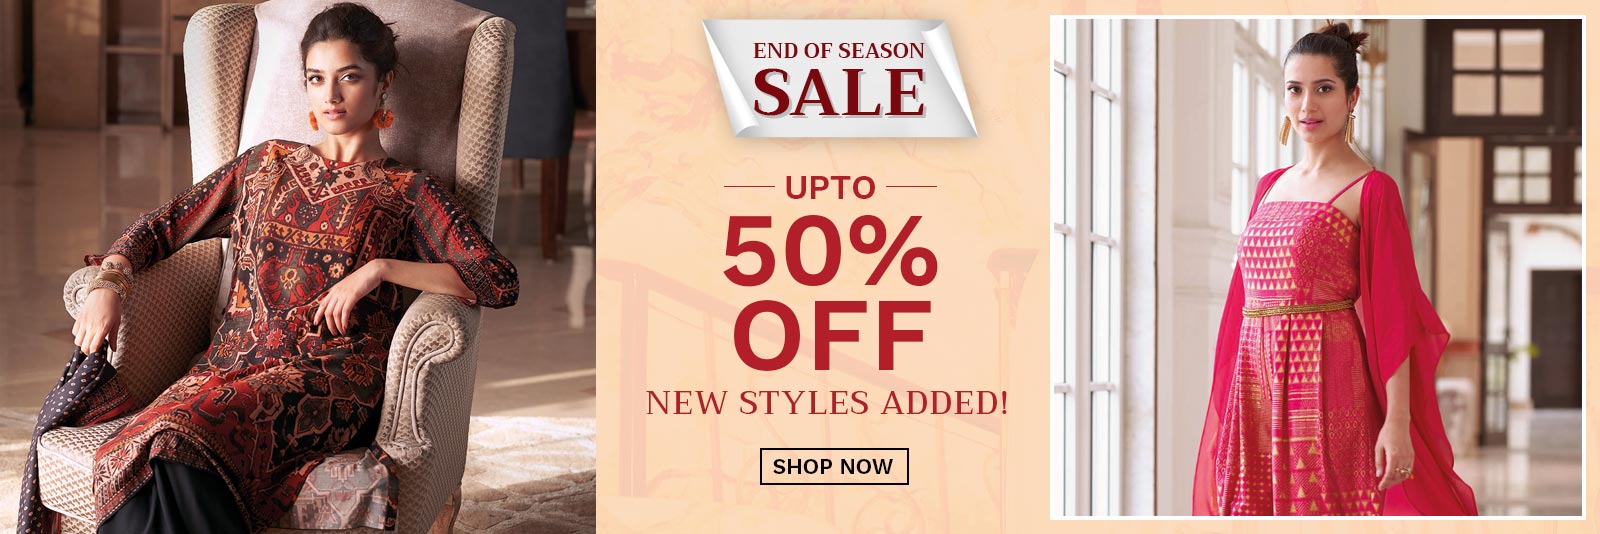 Biba - Up To 50% discount on Women's Fashion New Arrivals